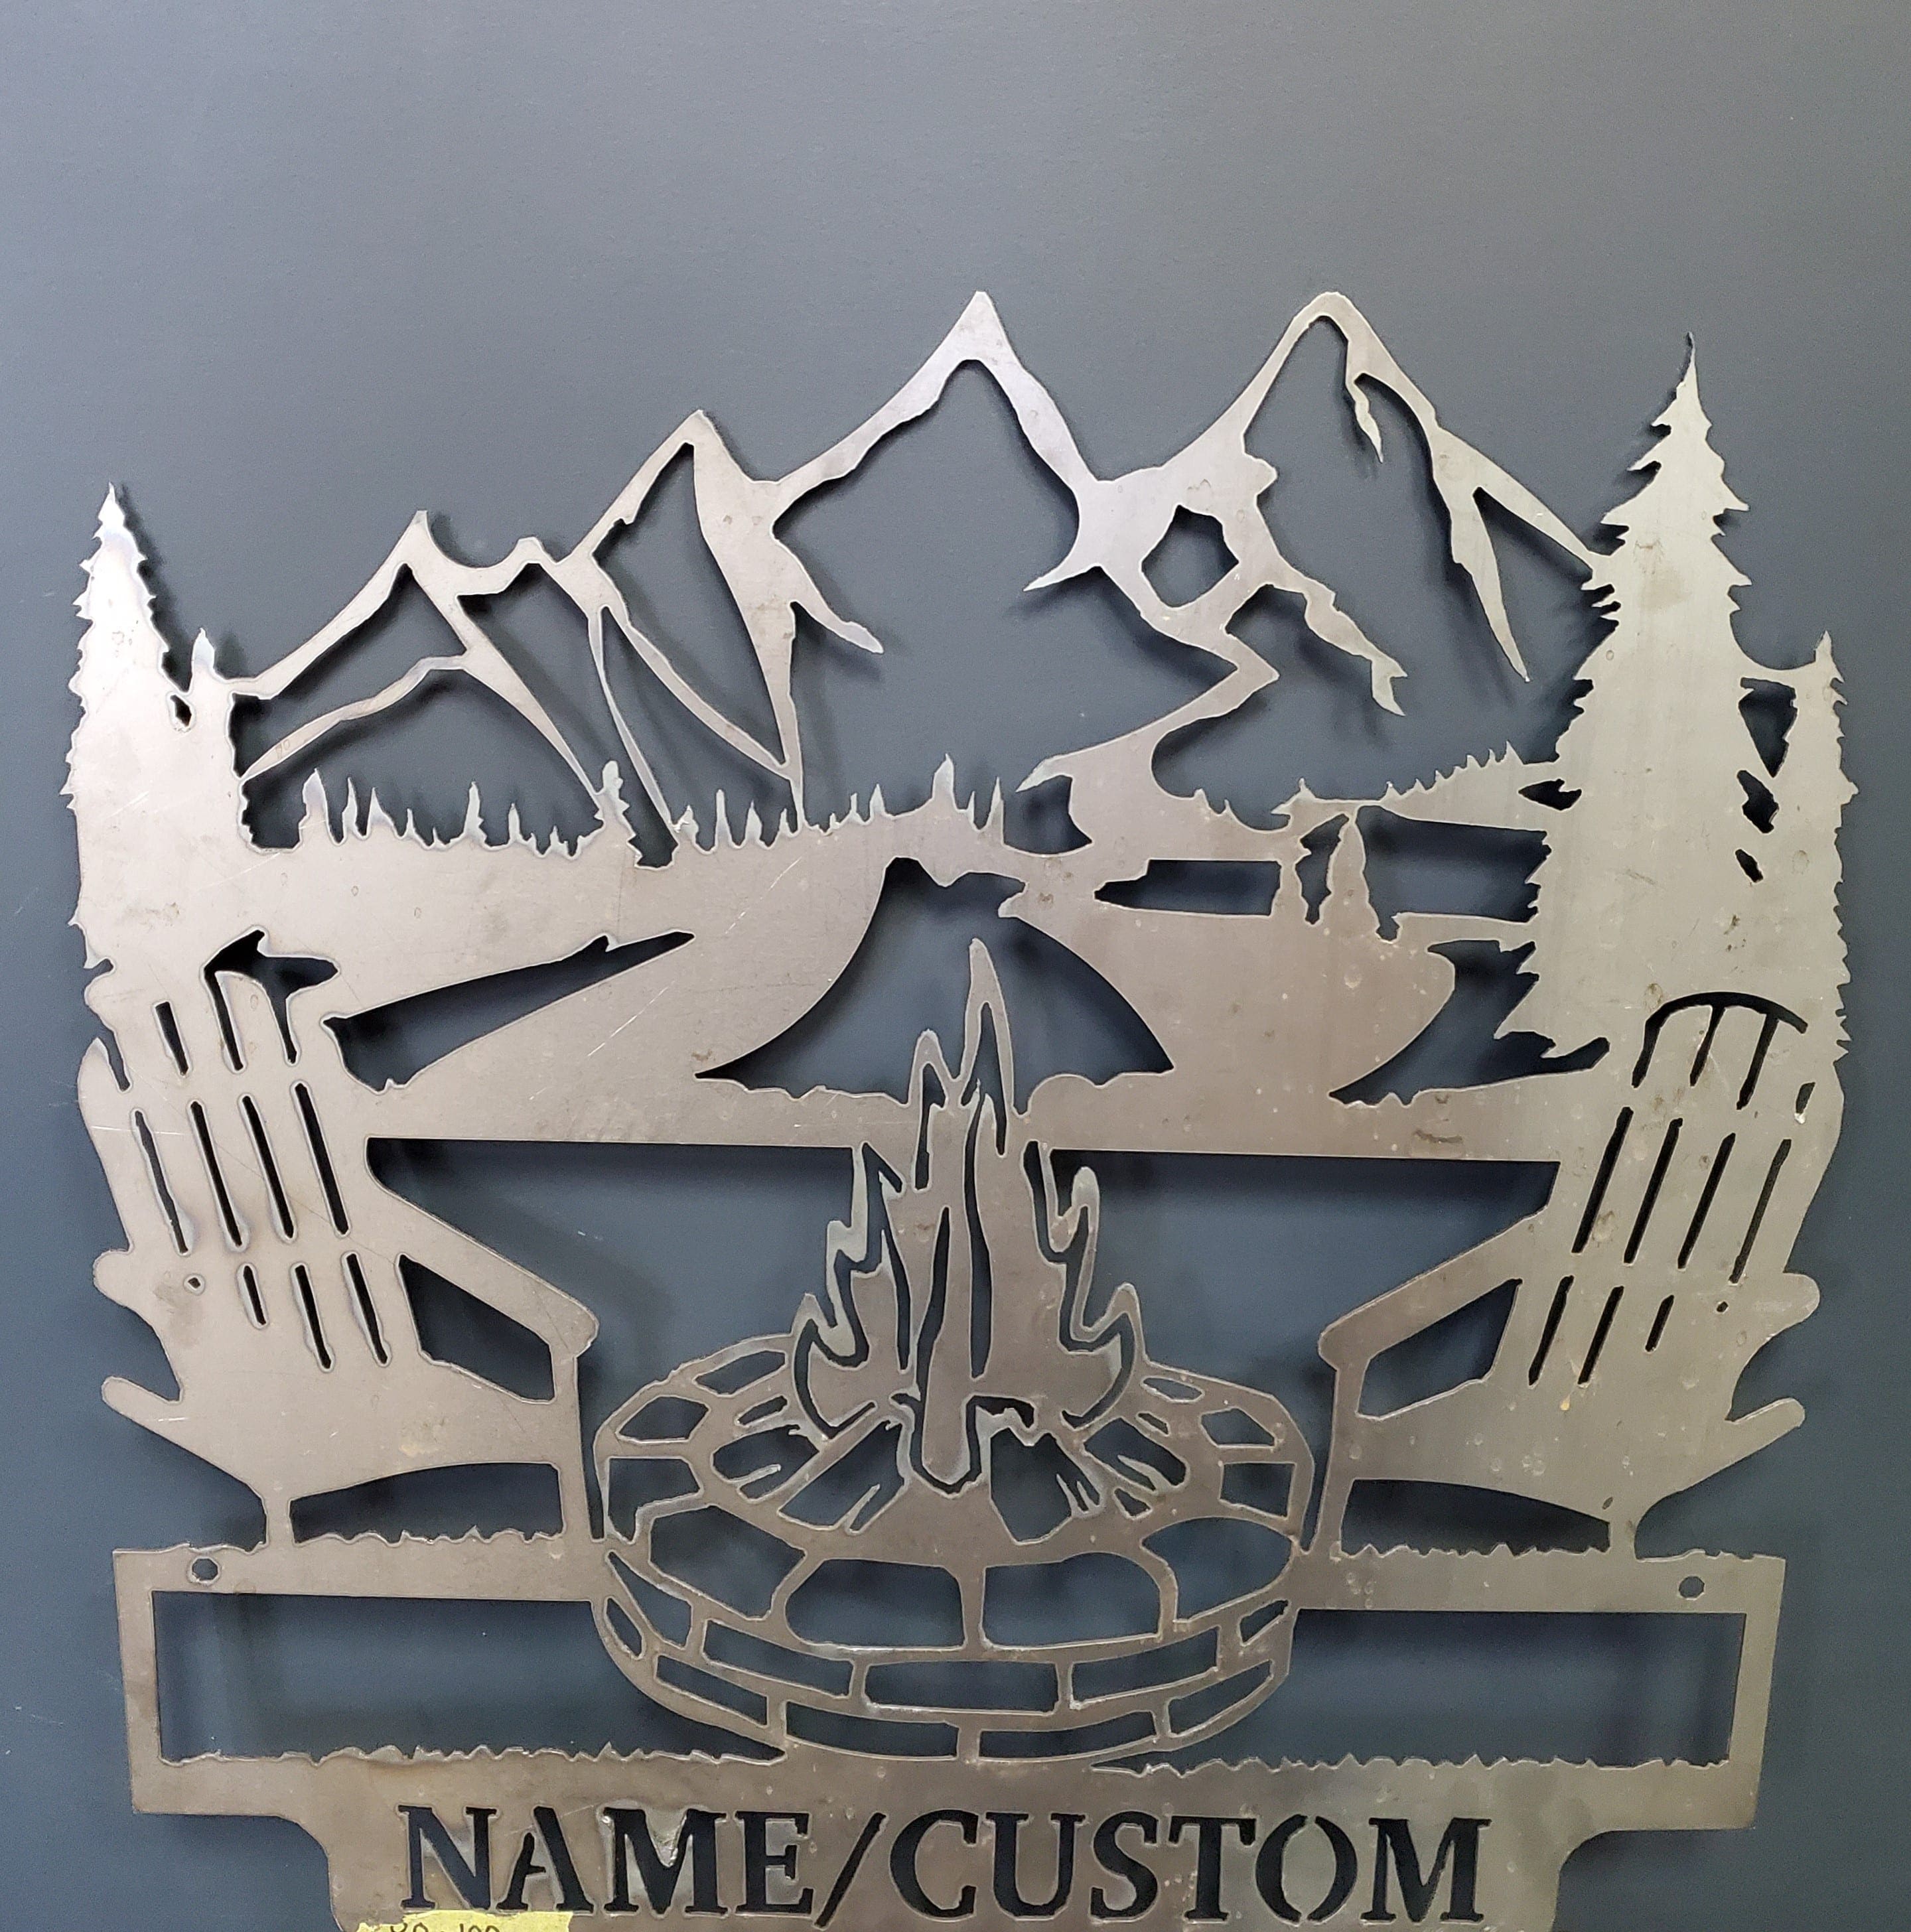 Custom-made metal sign with chairs, mountains and firepit